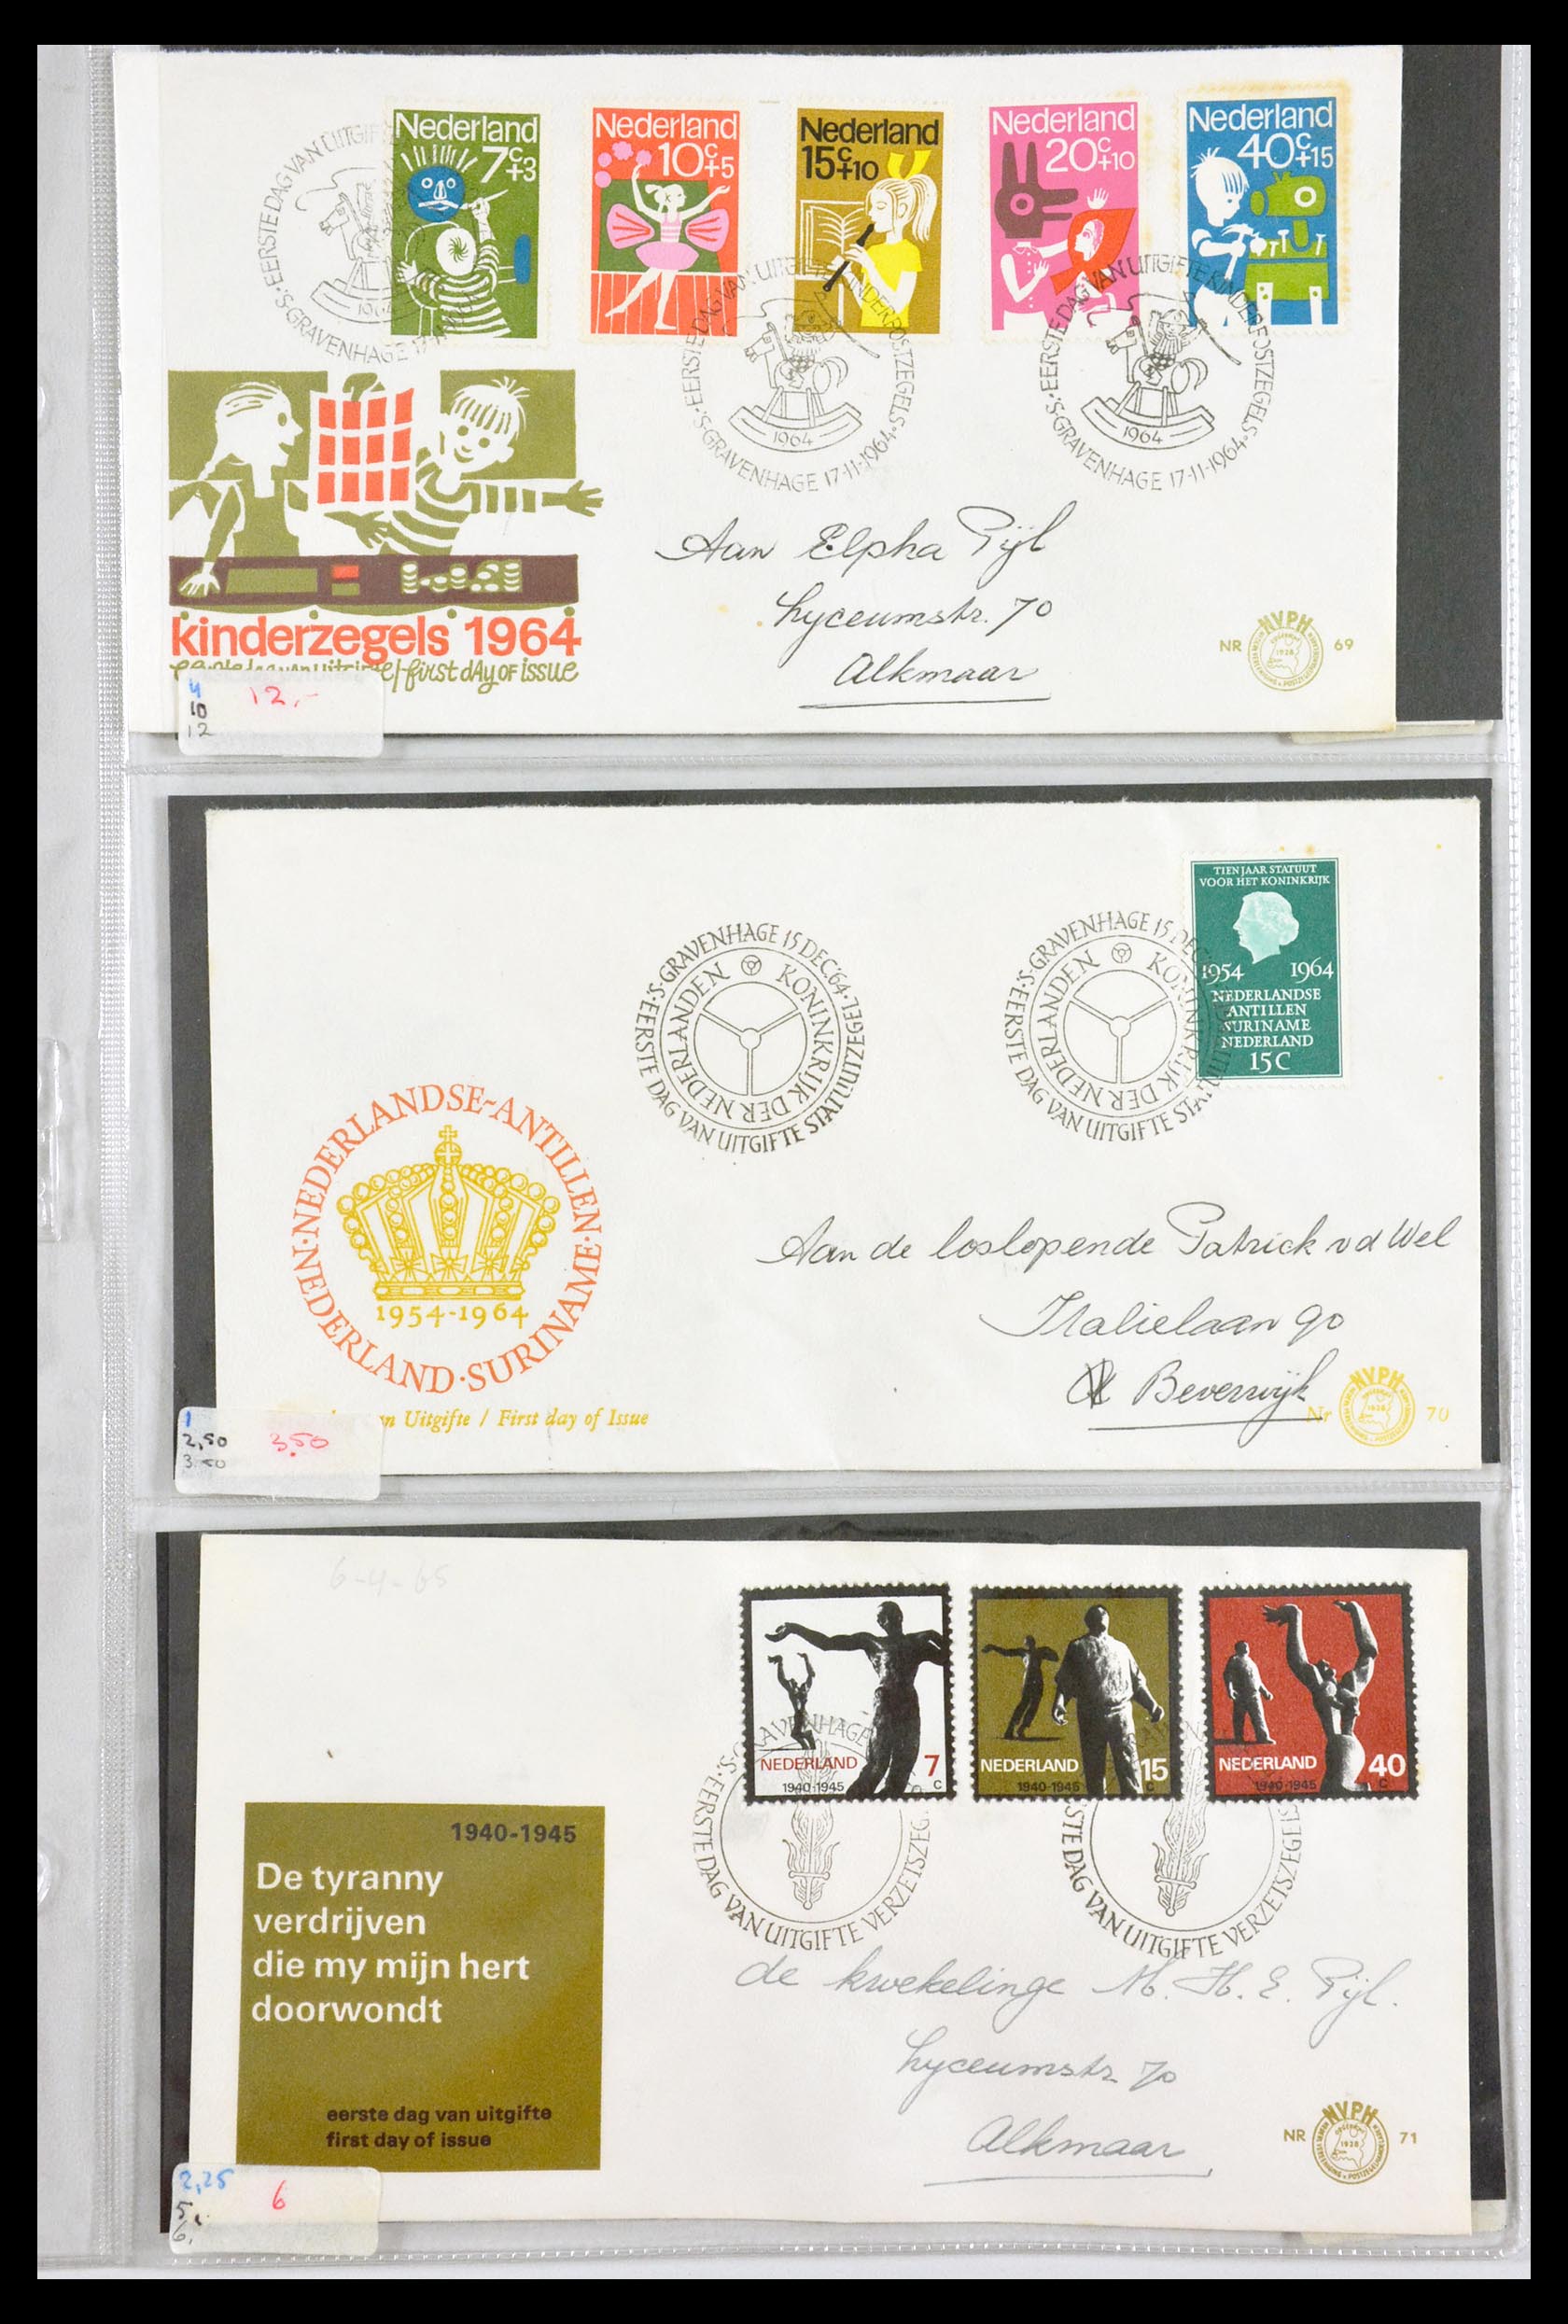 29540 025 - 29540 Netherlands 1950-1982 FDC's.